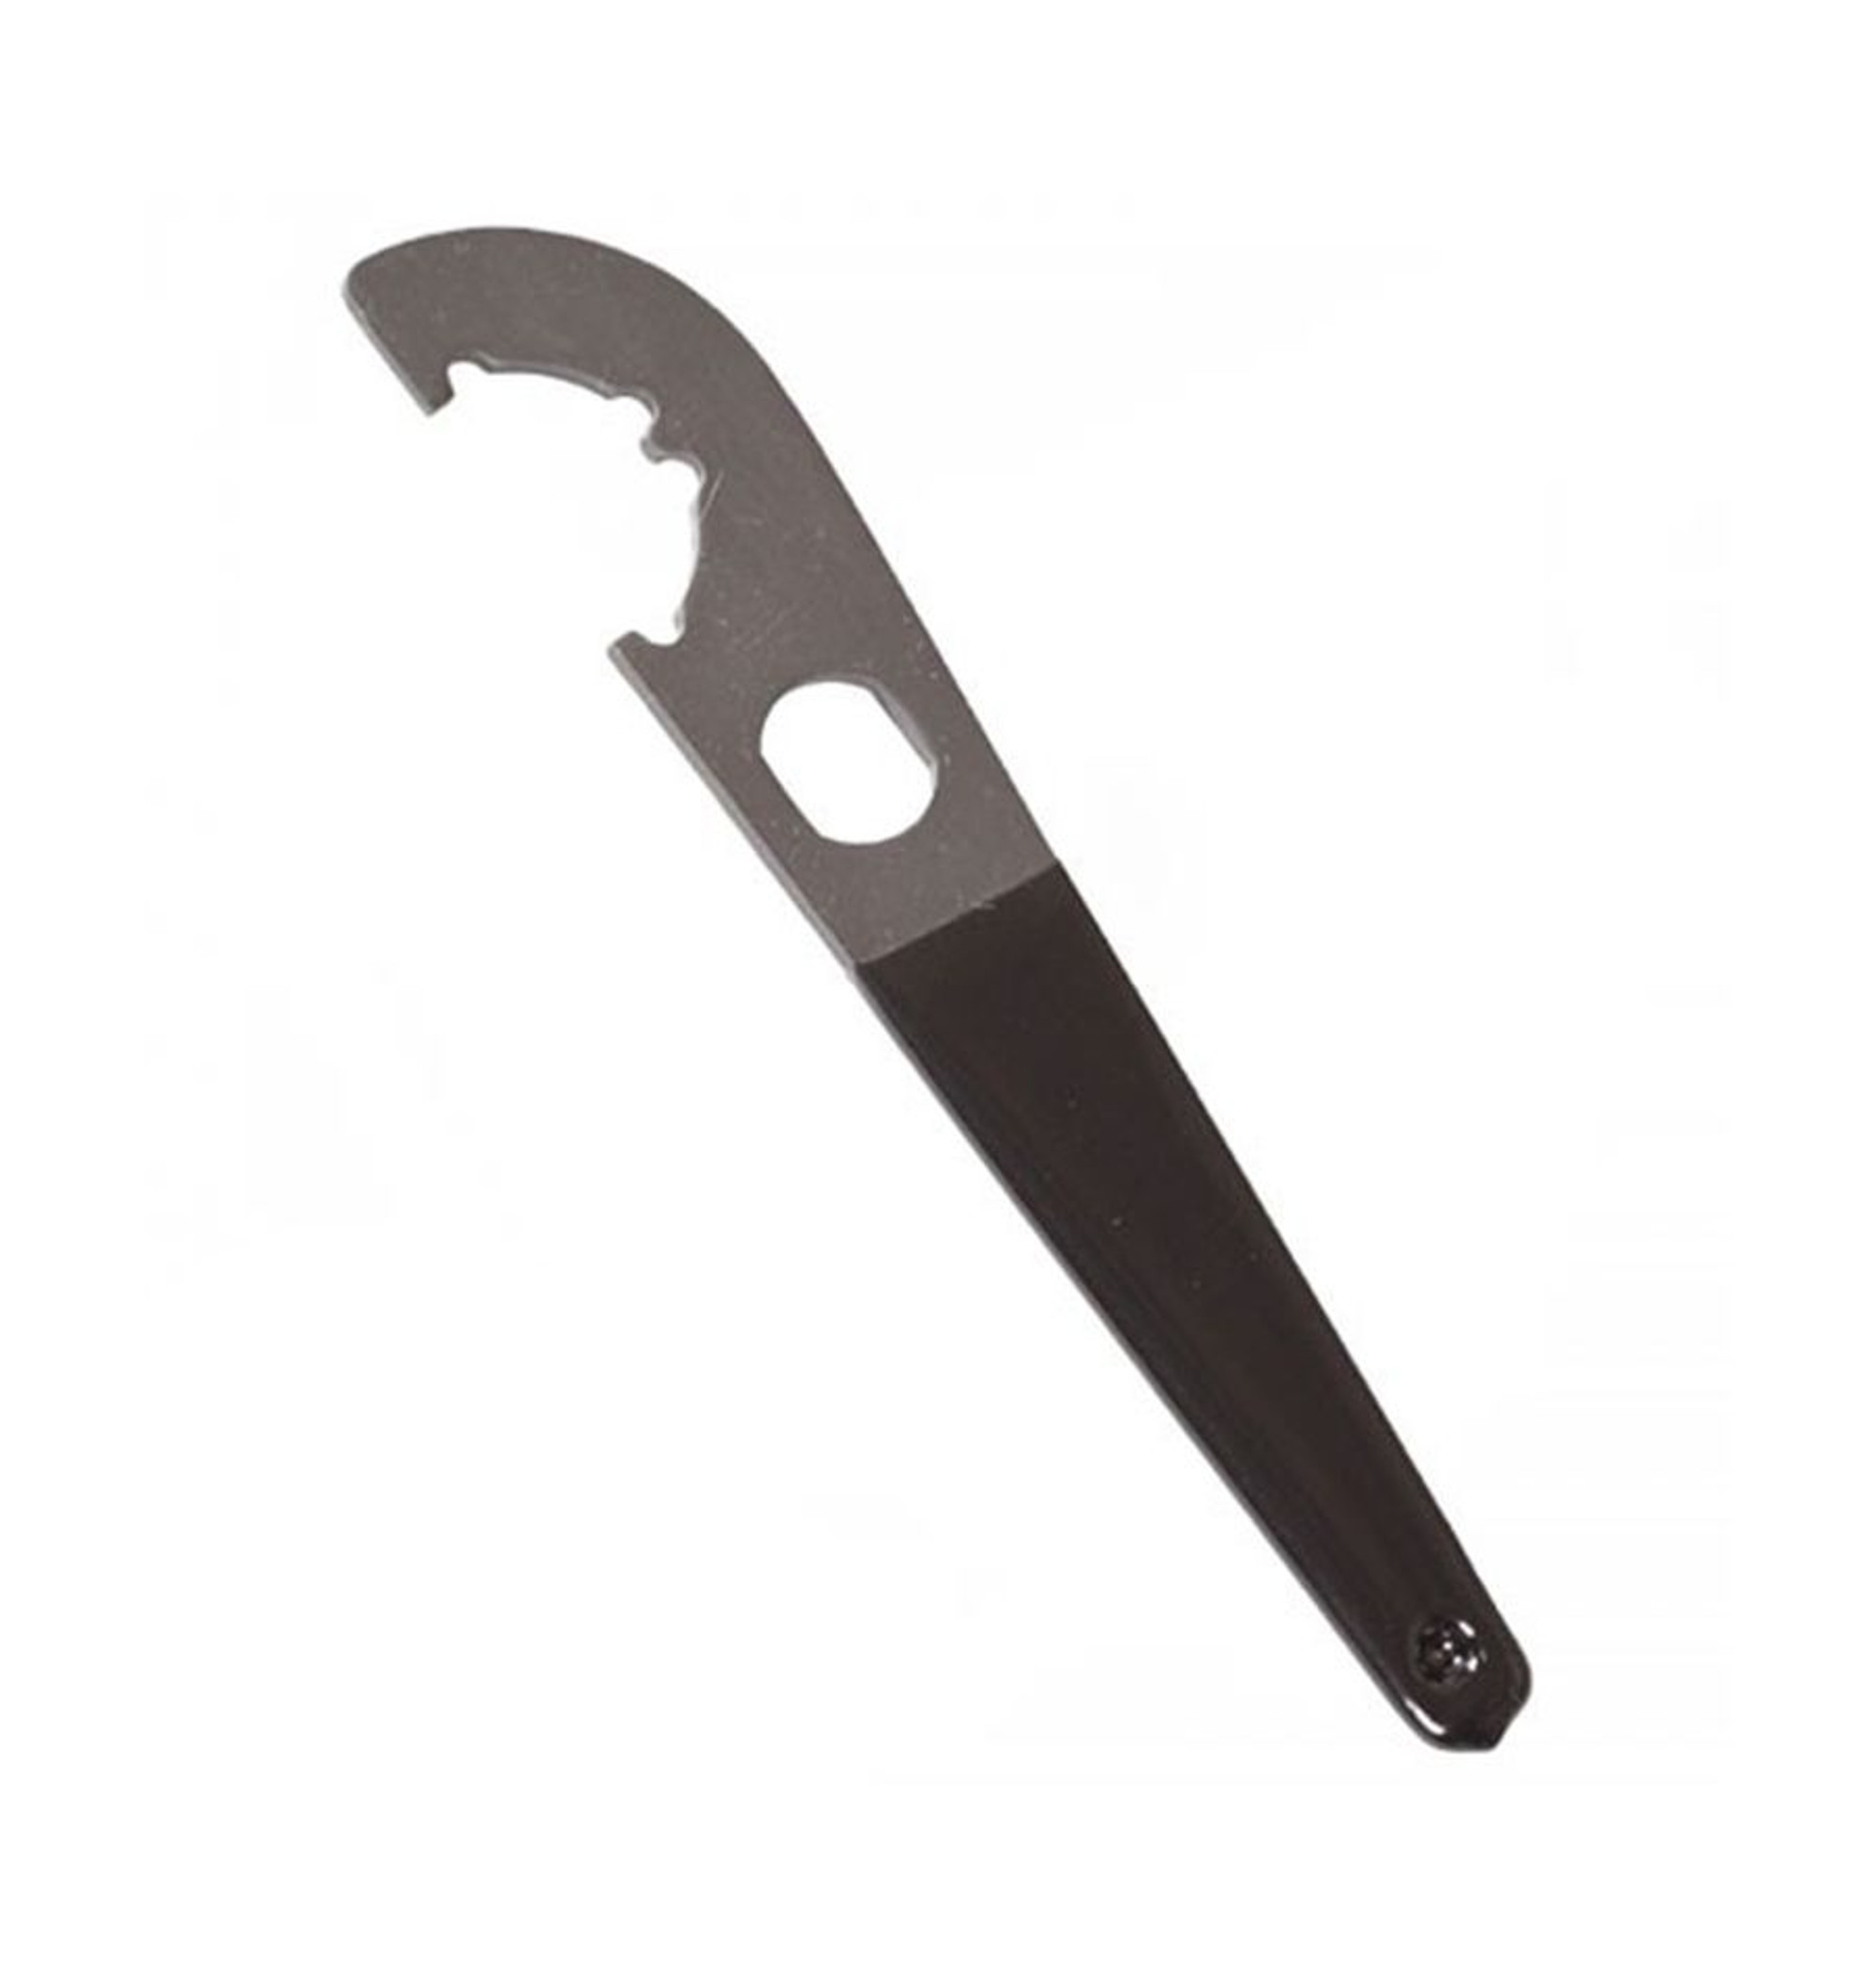 ERGO Tactical Car Stock Wrench